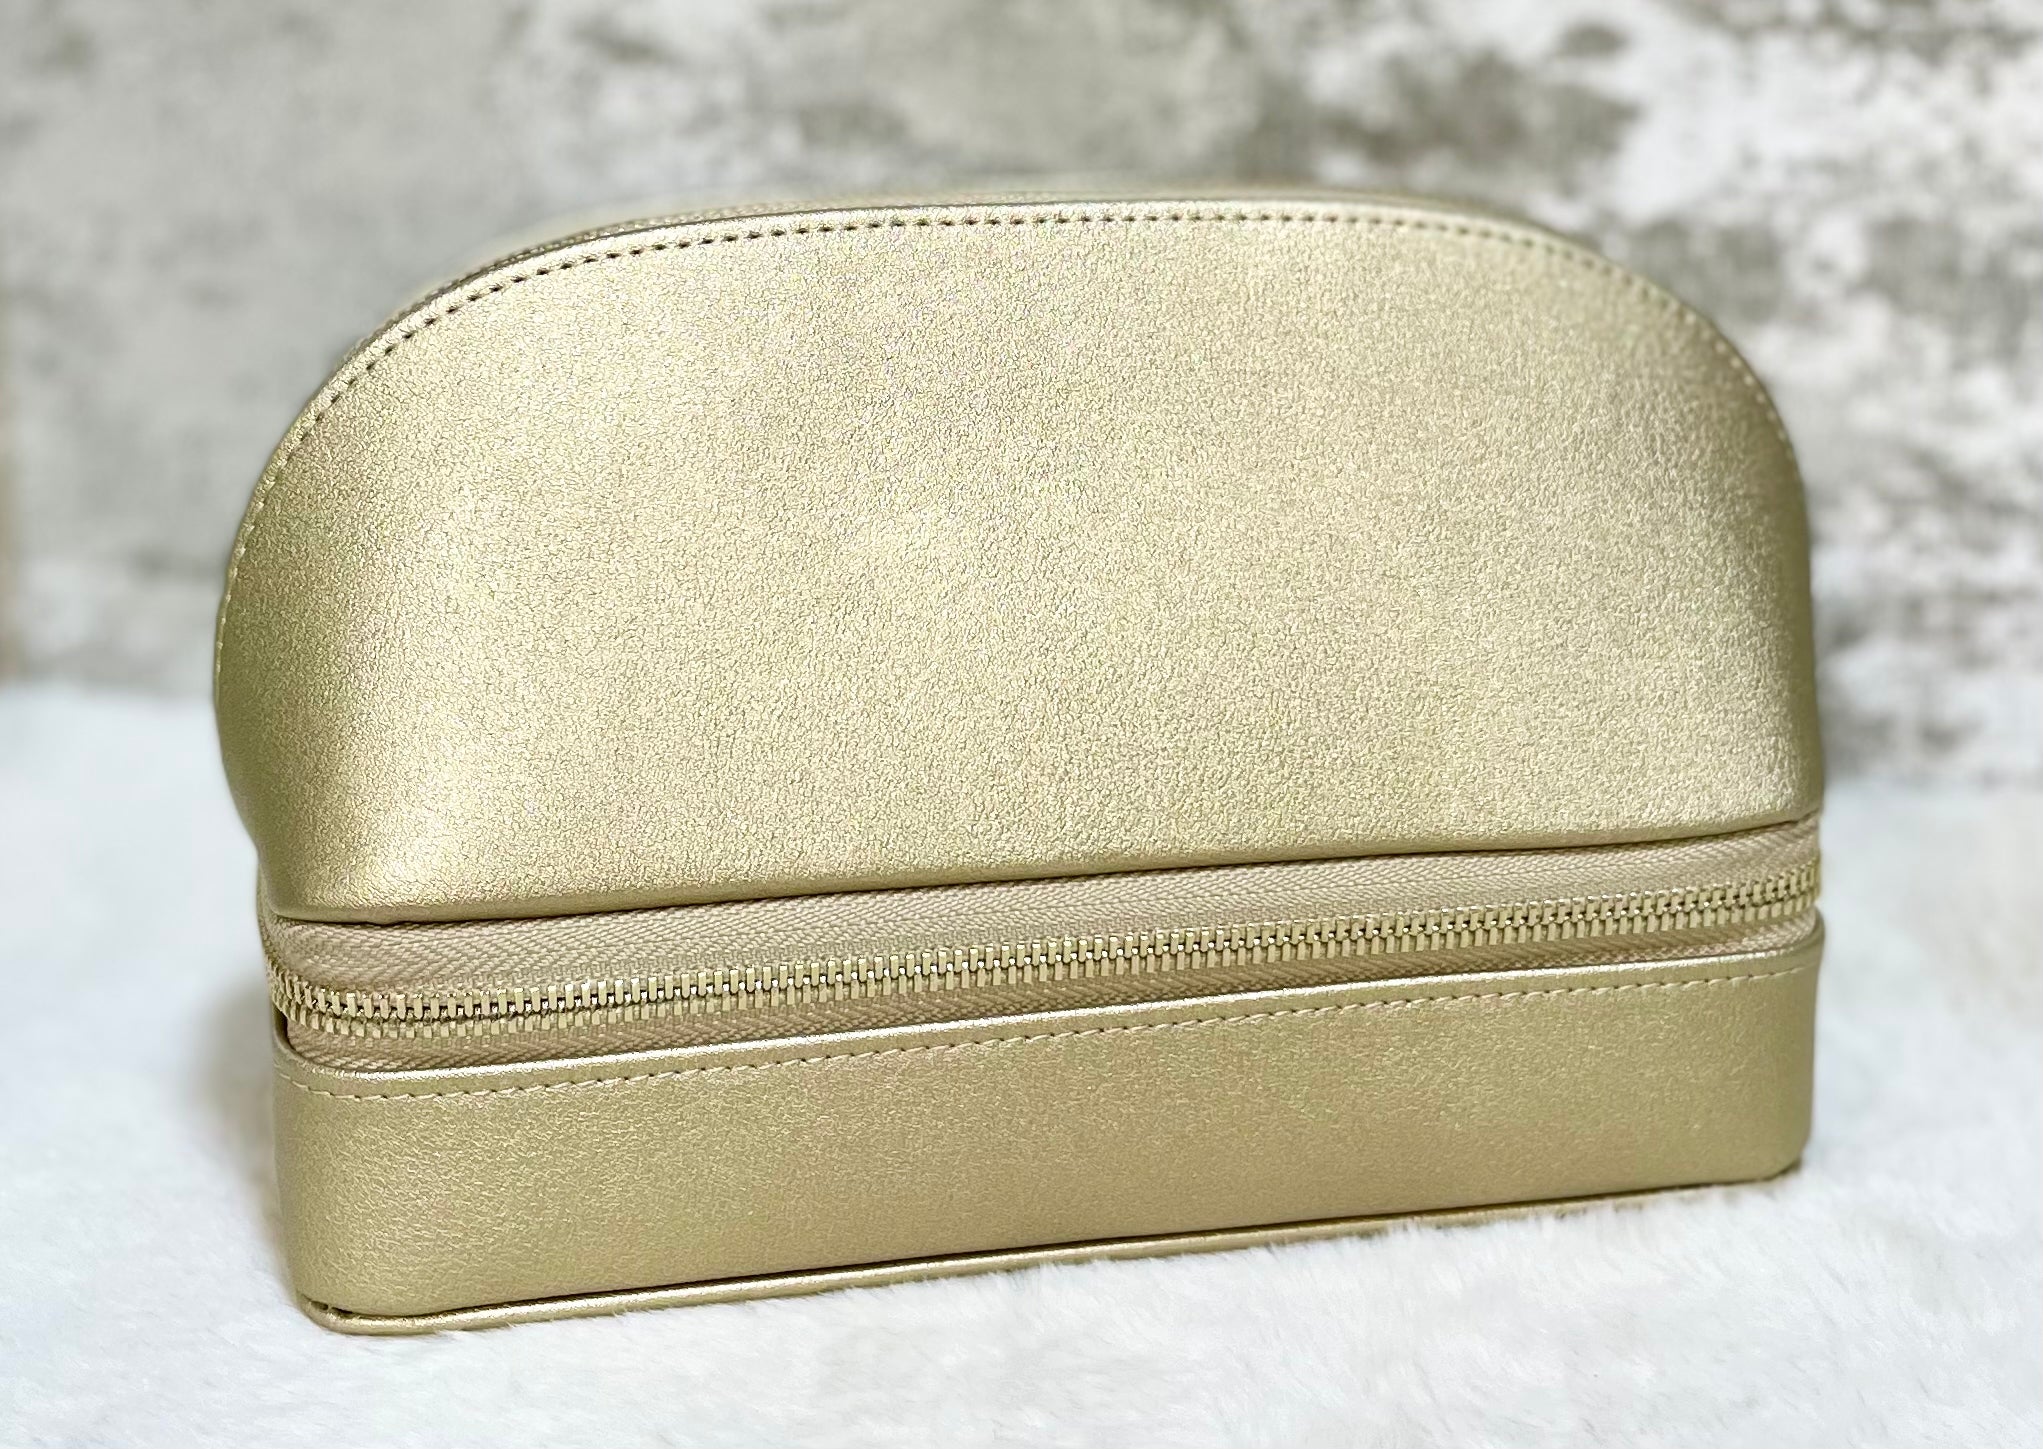 Hollis Gold Travel Jewelry Case with Mirror